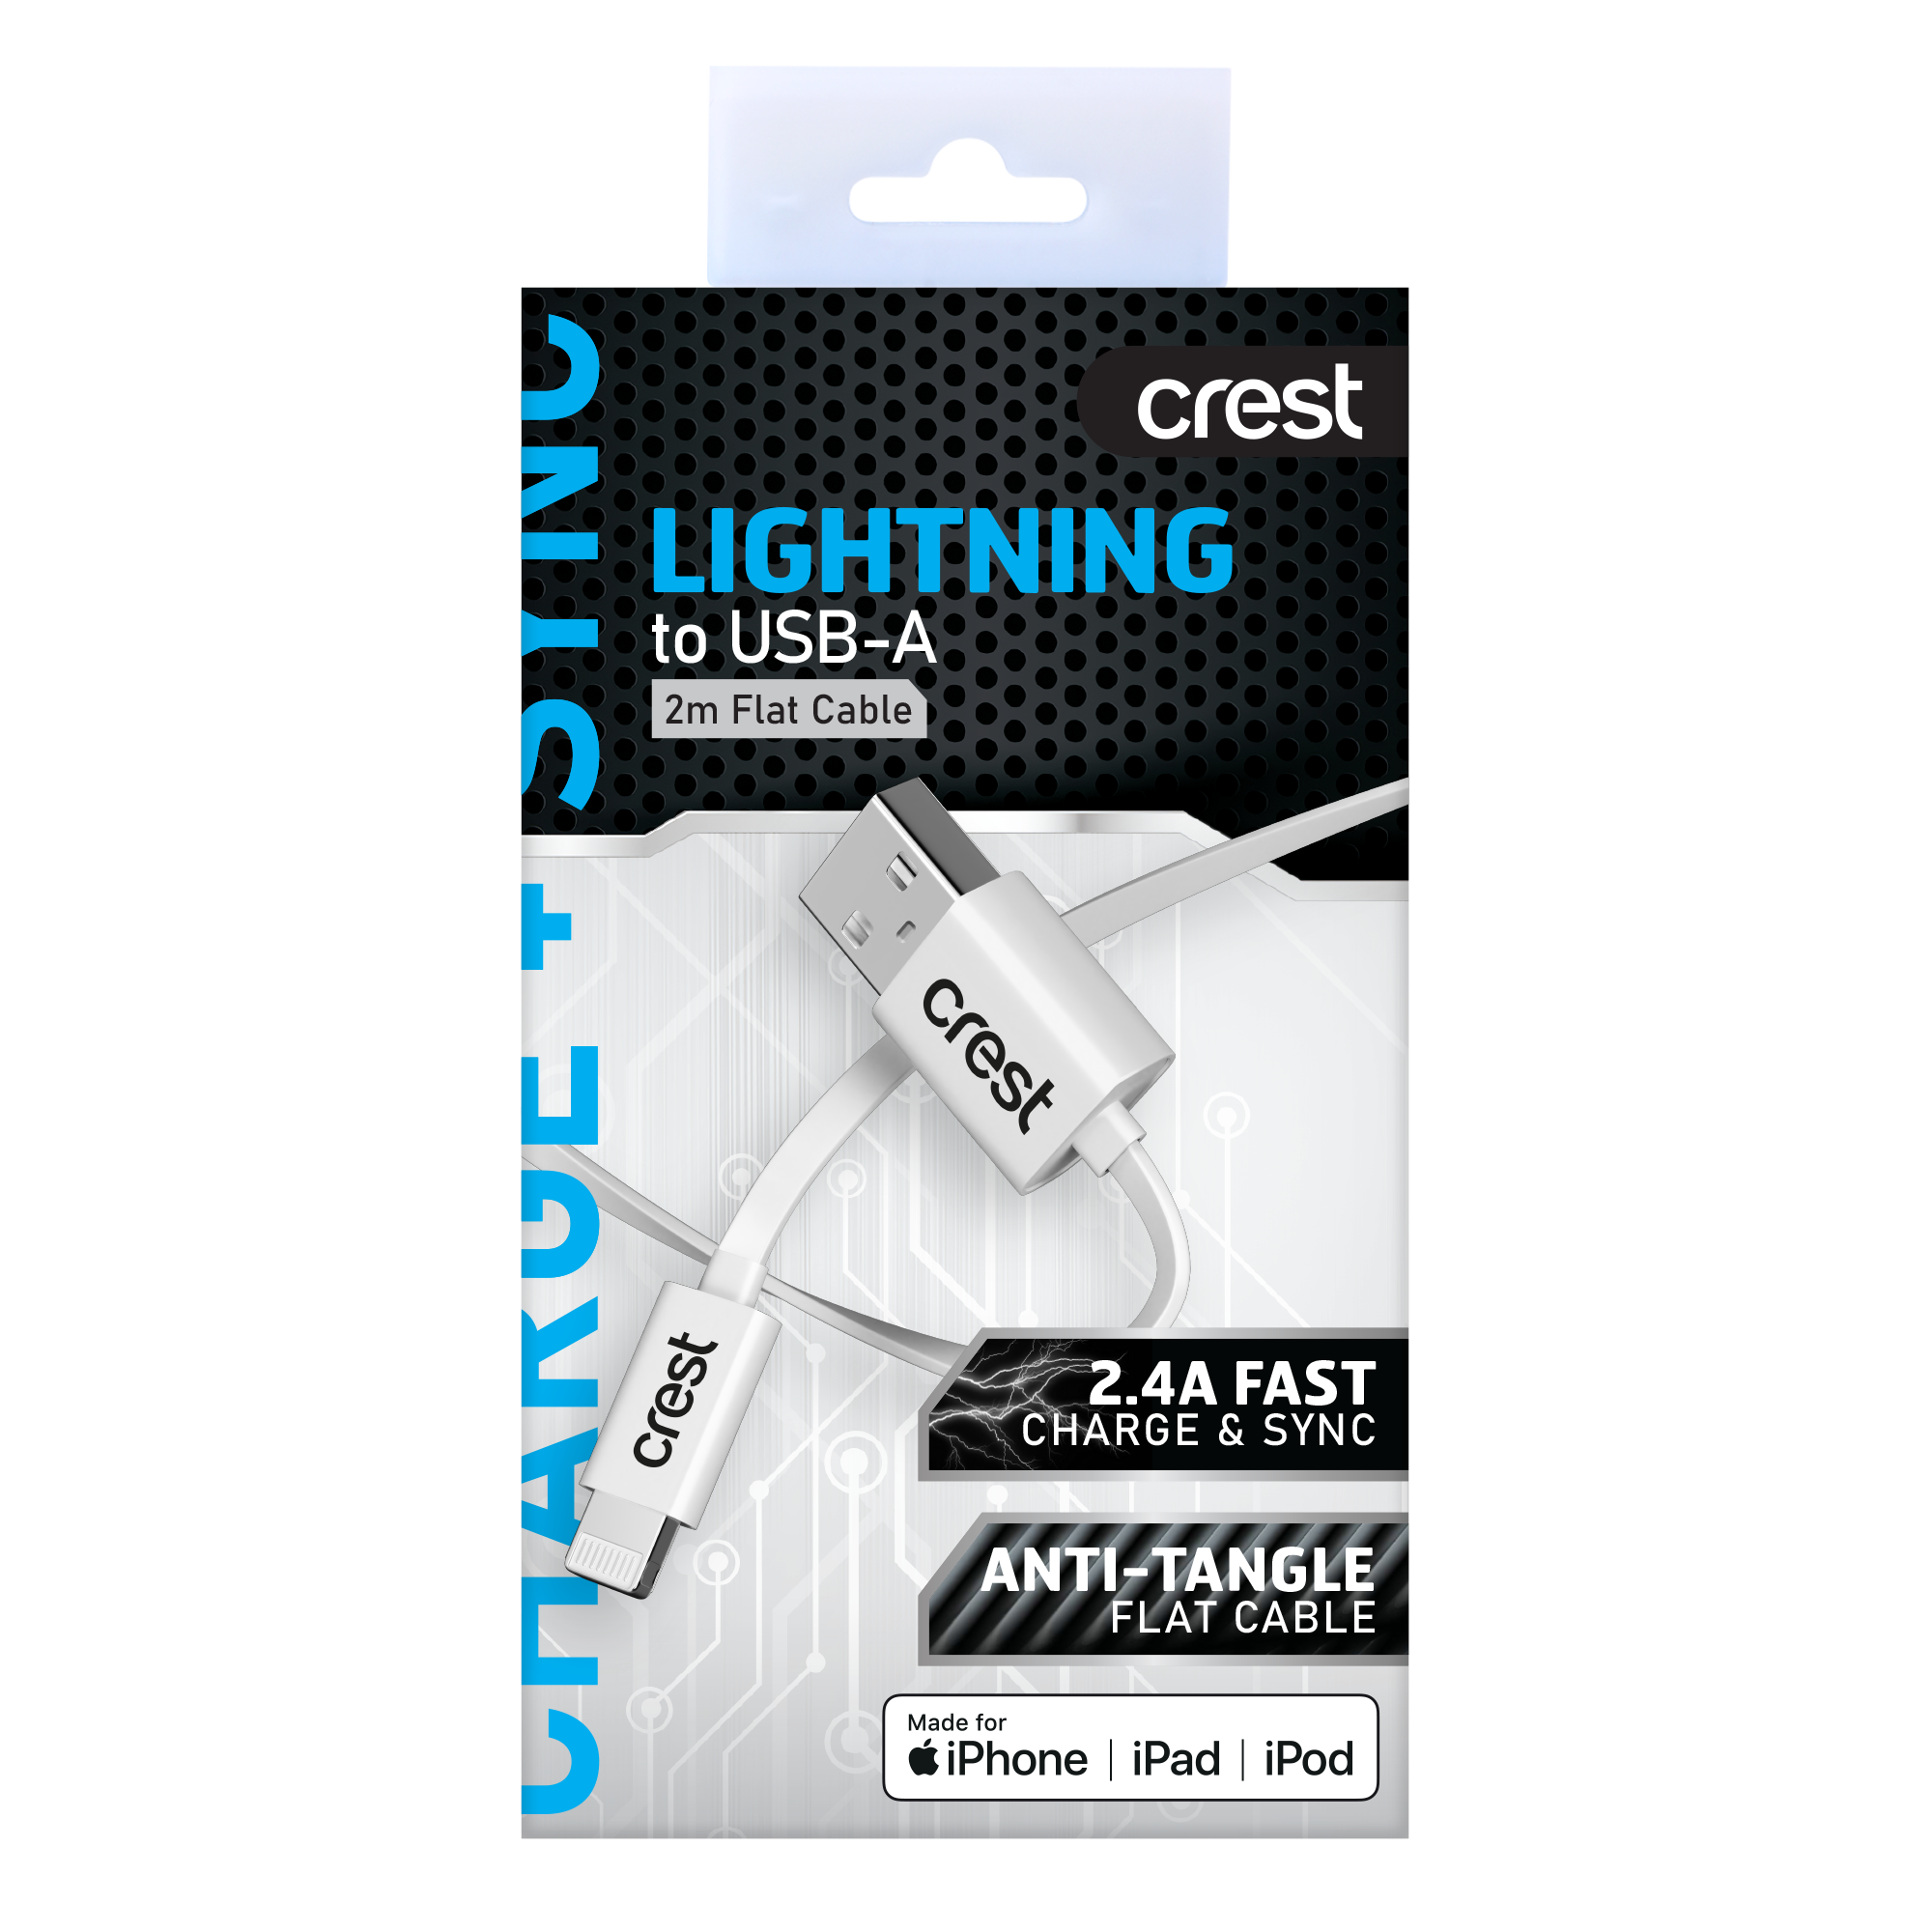 Lightning to USB-A Flat Cable 2M - White